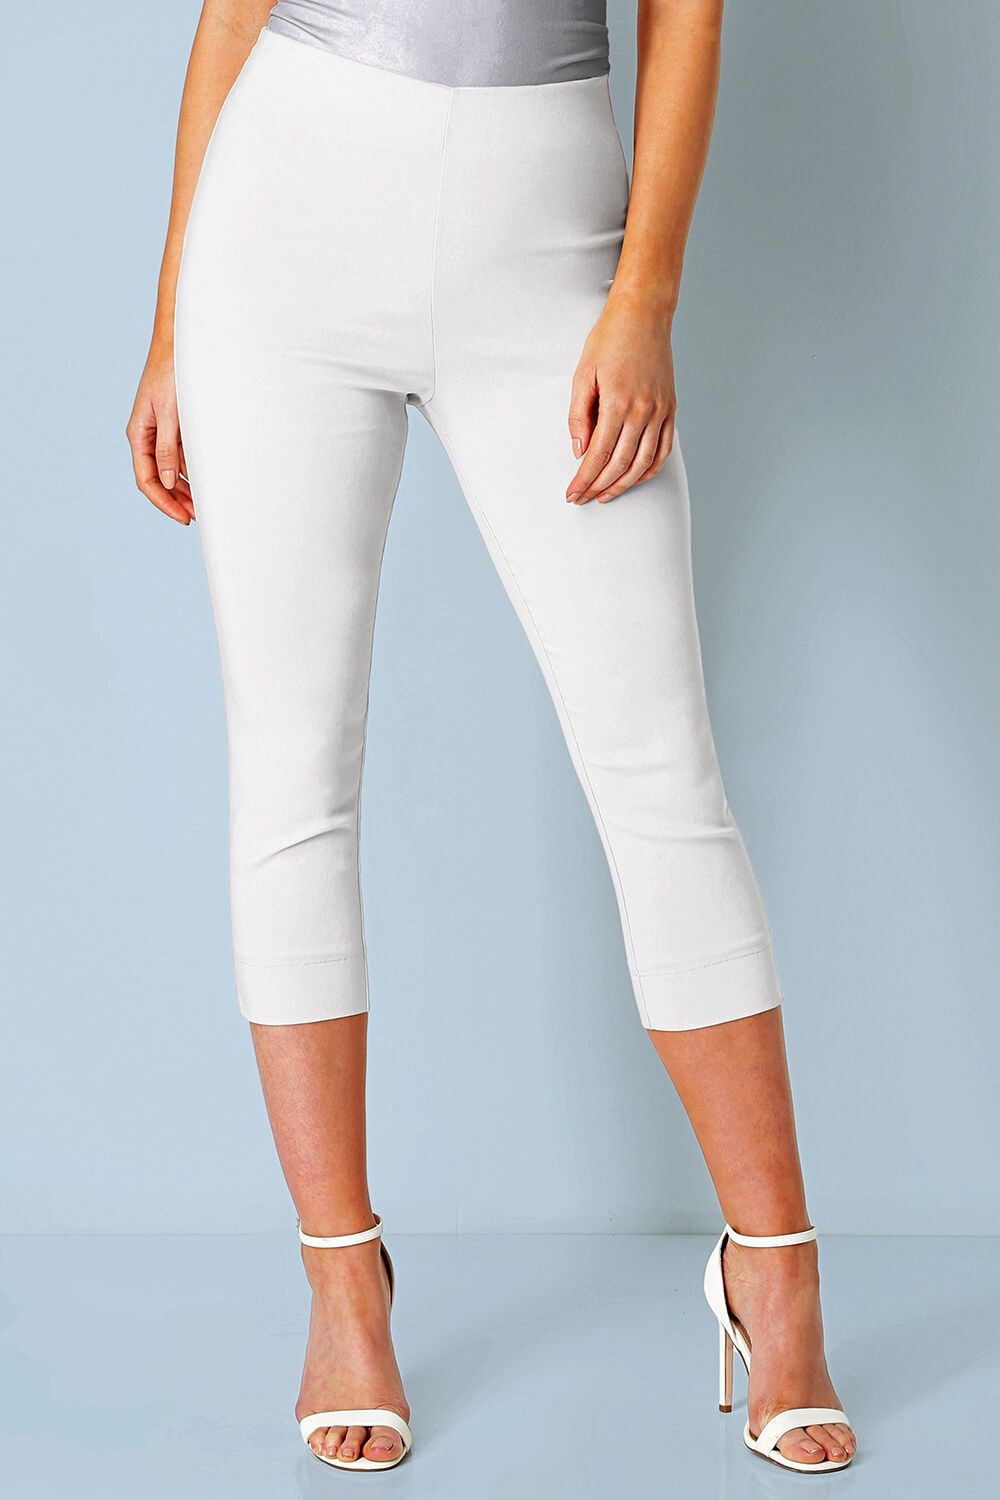 White Cropped Pants for Women